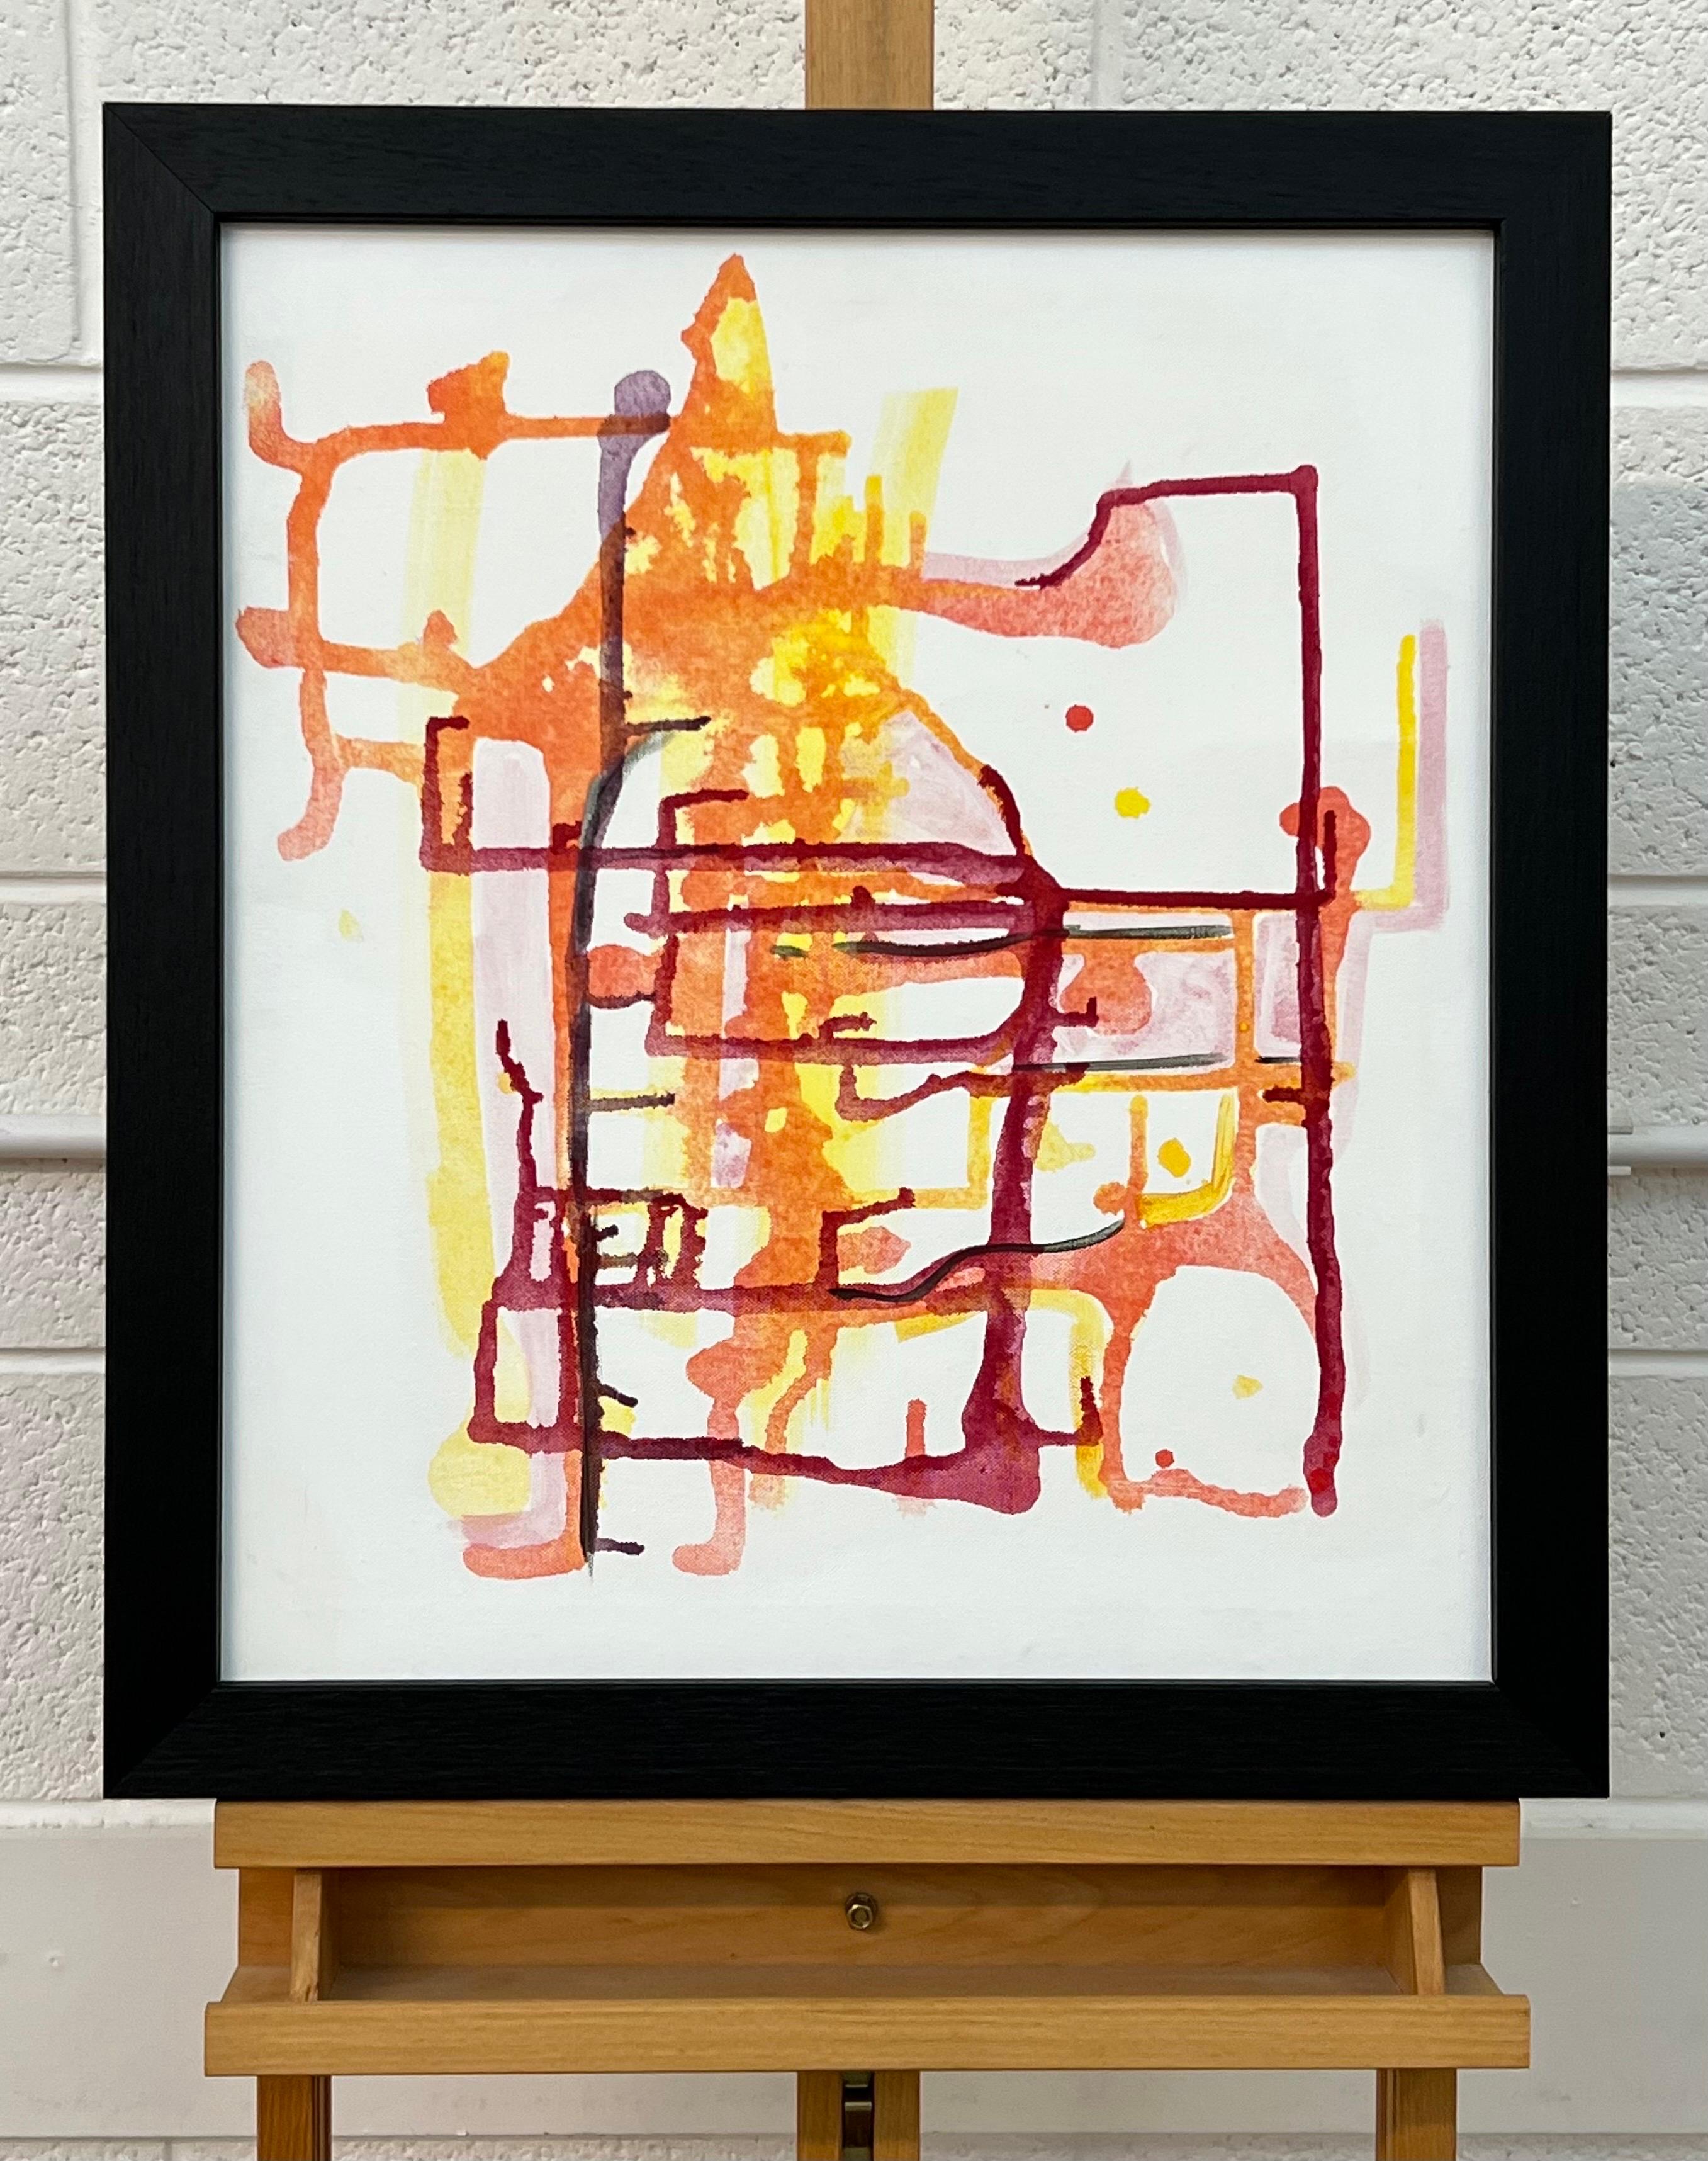 Early Abstract Painting Red Yellow Orange on White Background by British Artist For Sale 10